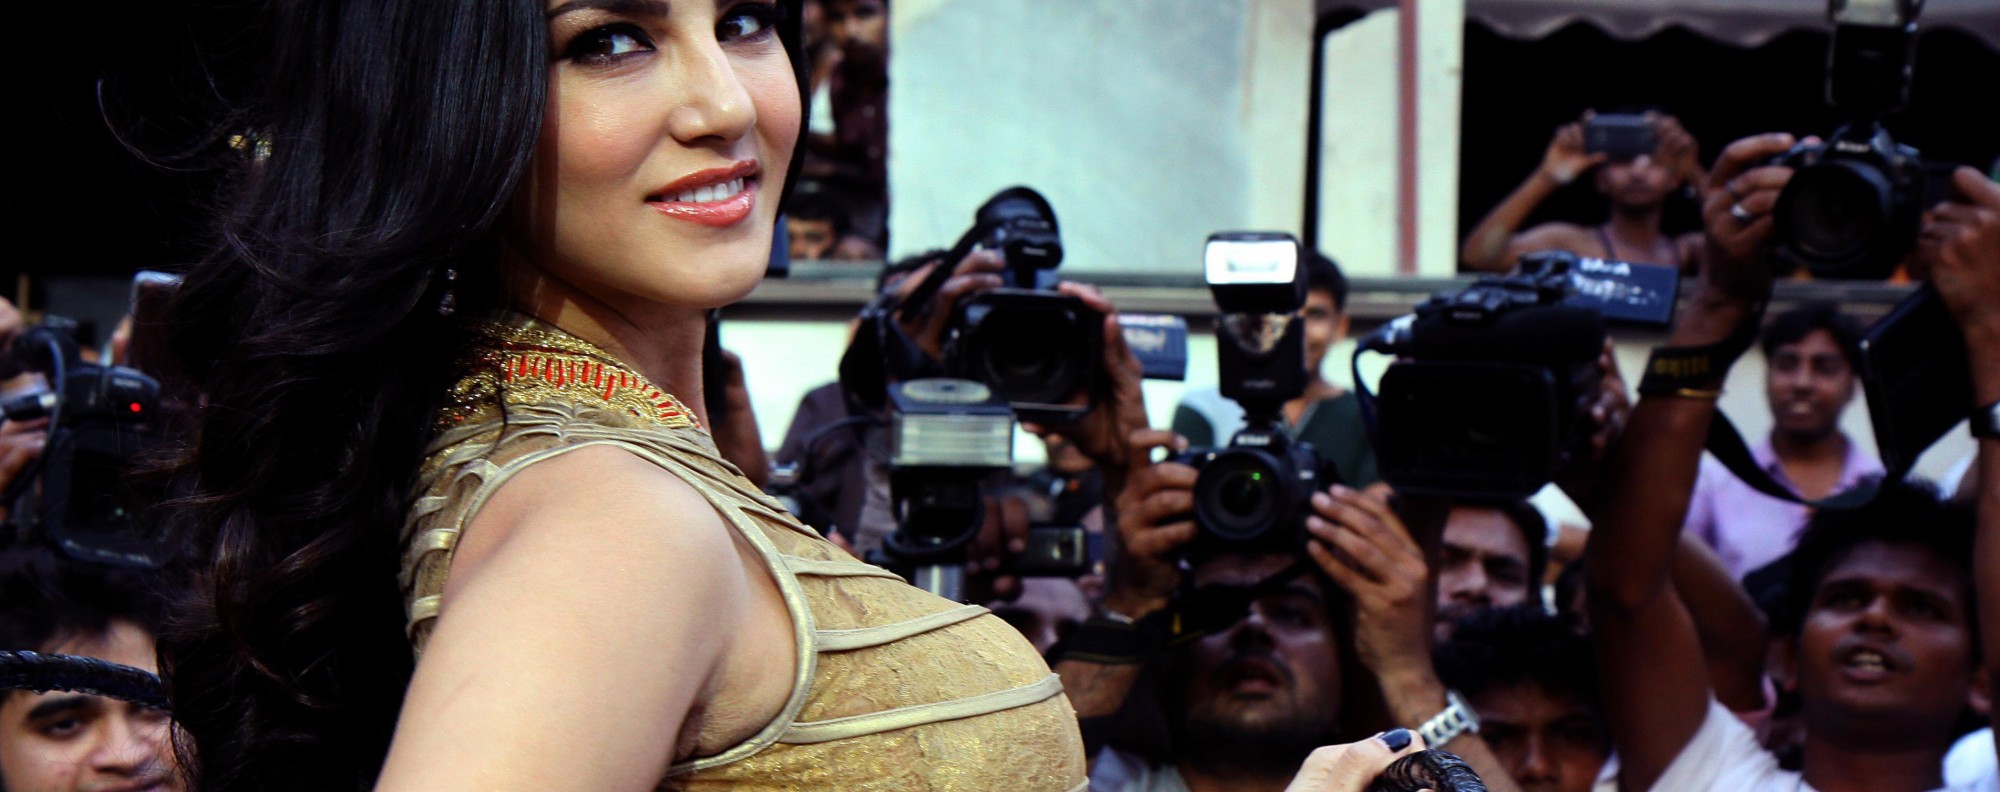 Porn Movie 2019 Sunny Leone - Uncovered: American porn star Sunny Leone's amazing journey to Bollywood  fame | South China Morning Post